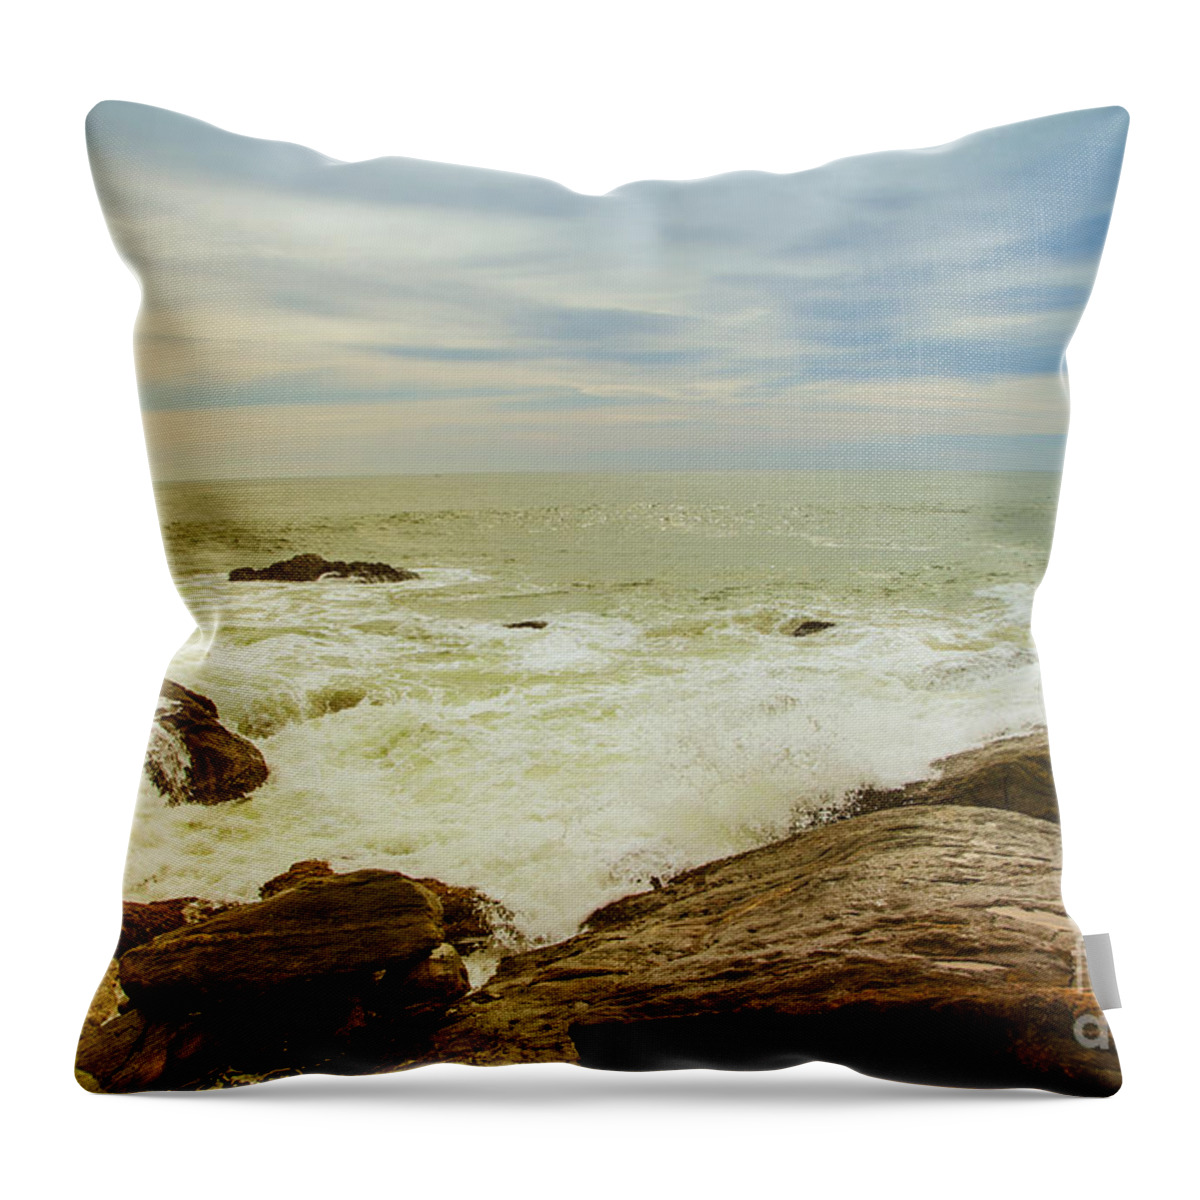 Water Throw Pillow featuring the photograph Beautiful Coastal Landscape by Gina Koch